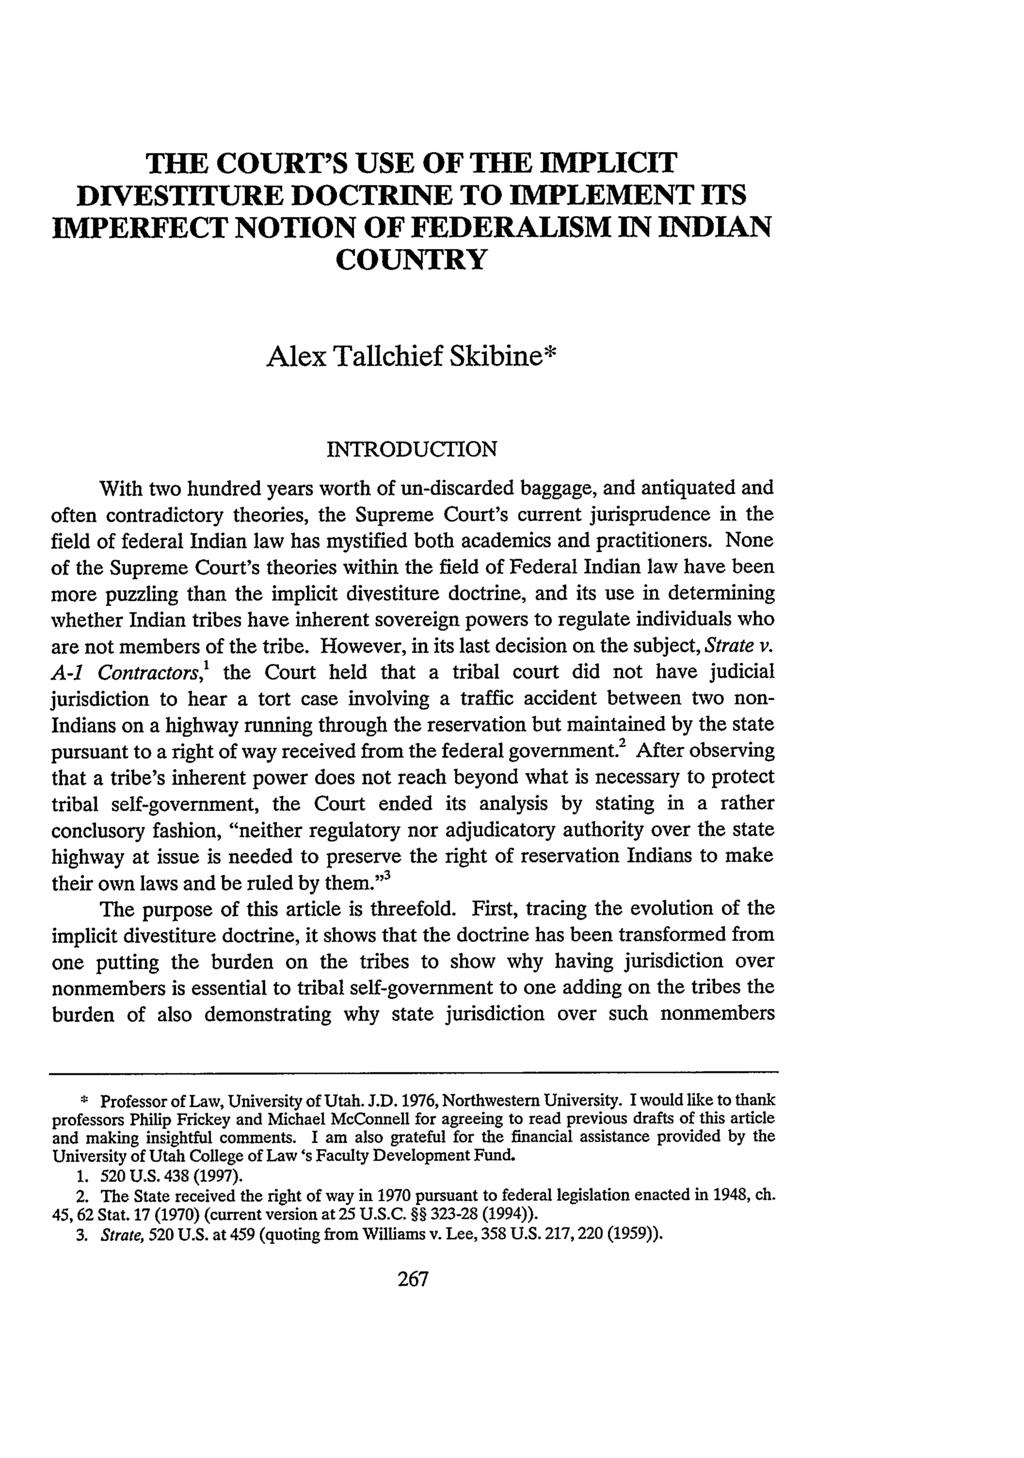 Skibine: The Court's Use of the Implicit Divestiture Doctrine to Implement THE COURT'S USE OF THE IMPLICIT DIVESTITURE DOCTRINE TO IMPLEMENT ITS IMPERFECT NOTION OF FEDERALISM IN INDIAN COUNTRY Alex